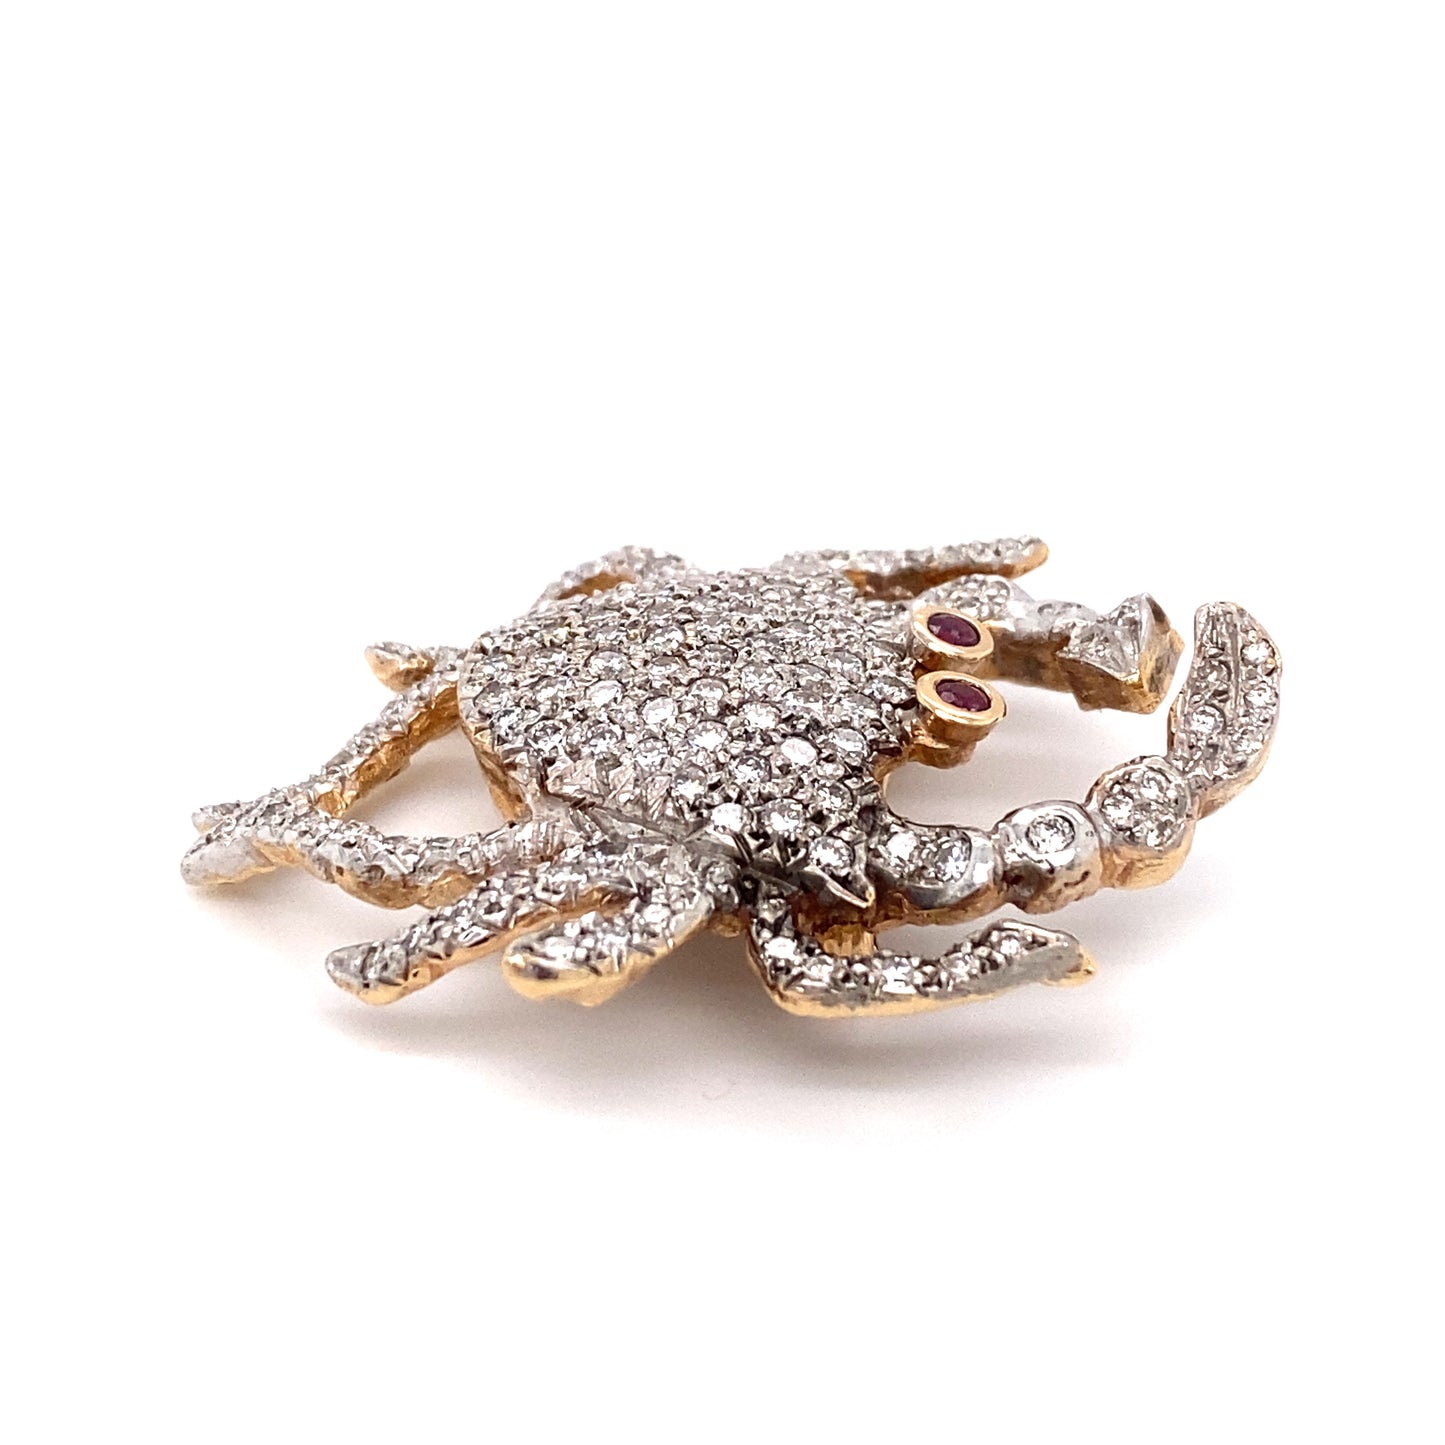 Circa 1960s 2.0 Carat Diamond and Ruby Crab Brooch in Platinum and 14K Gold